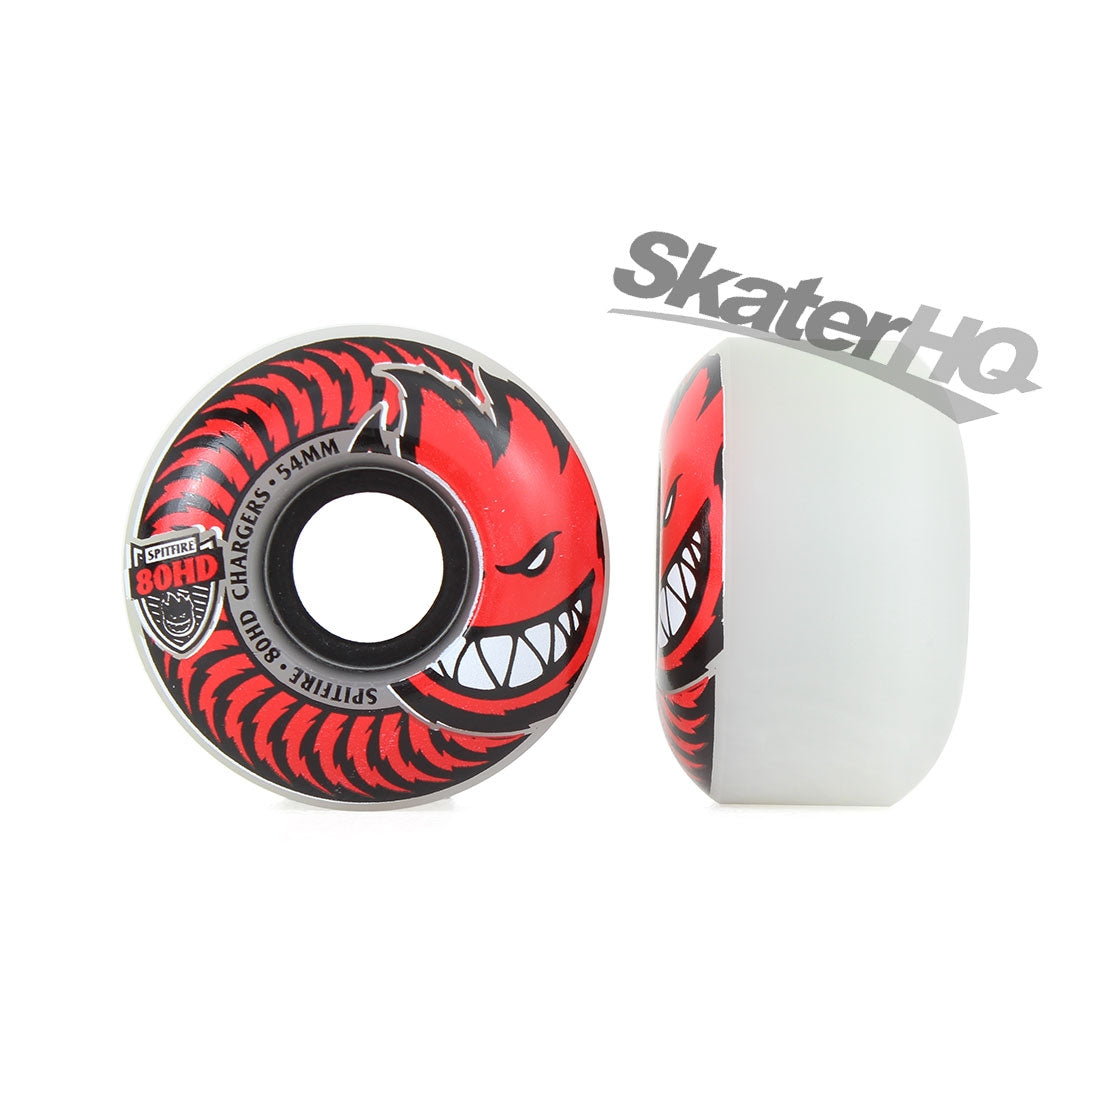 Spitfire 80HD Charger 54mm